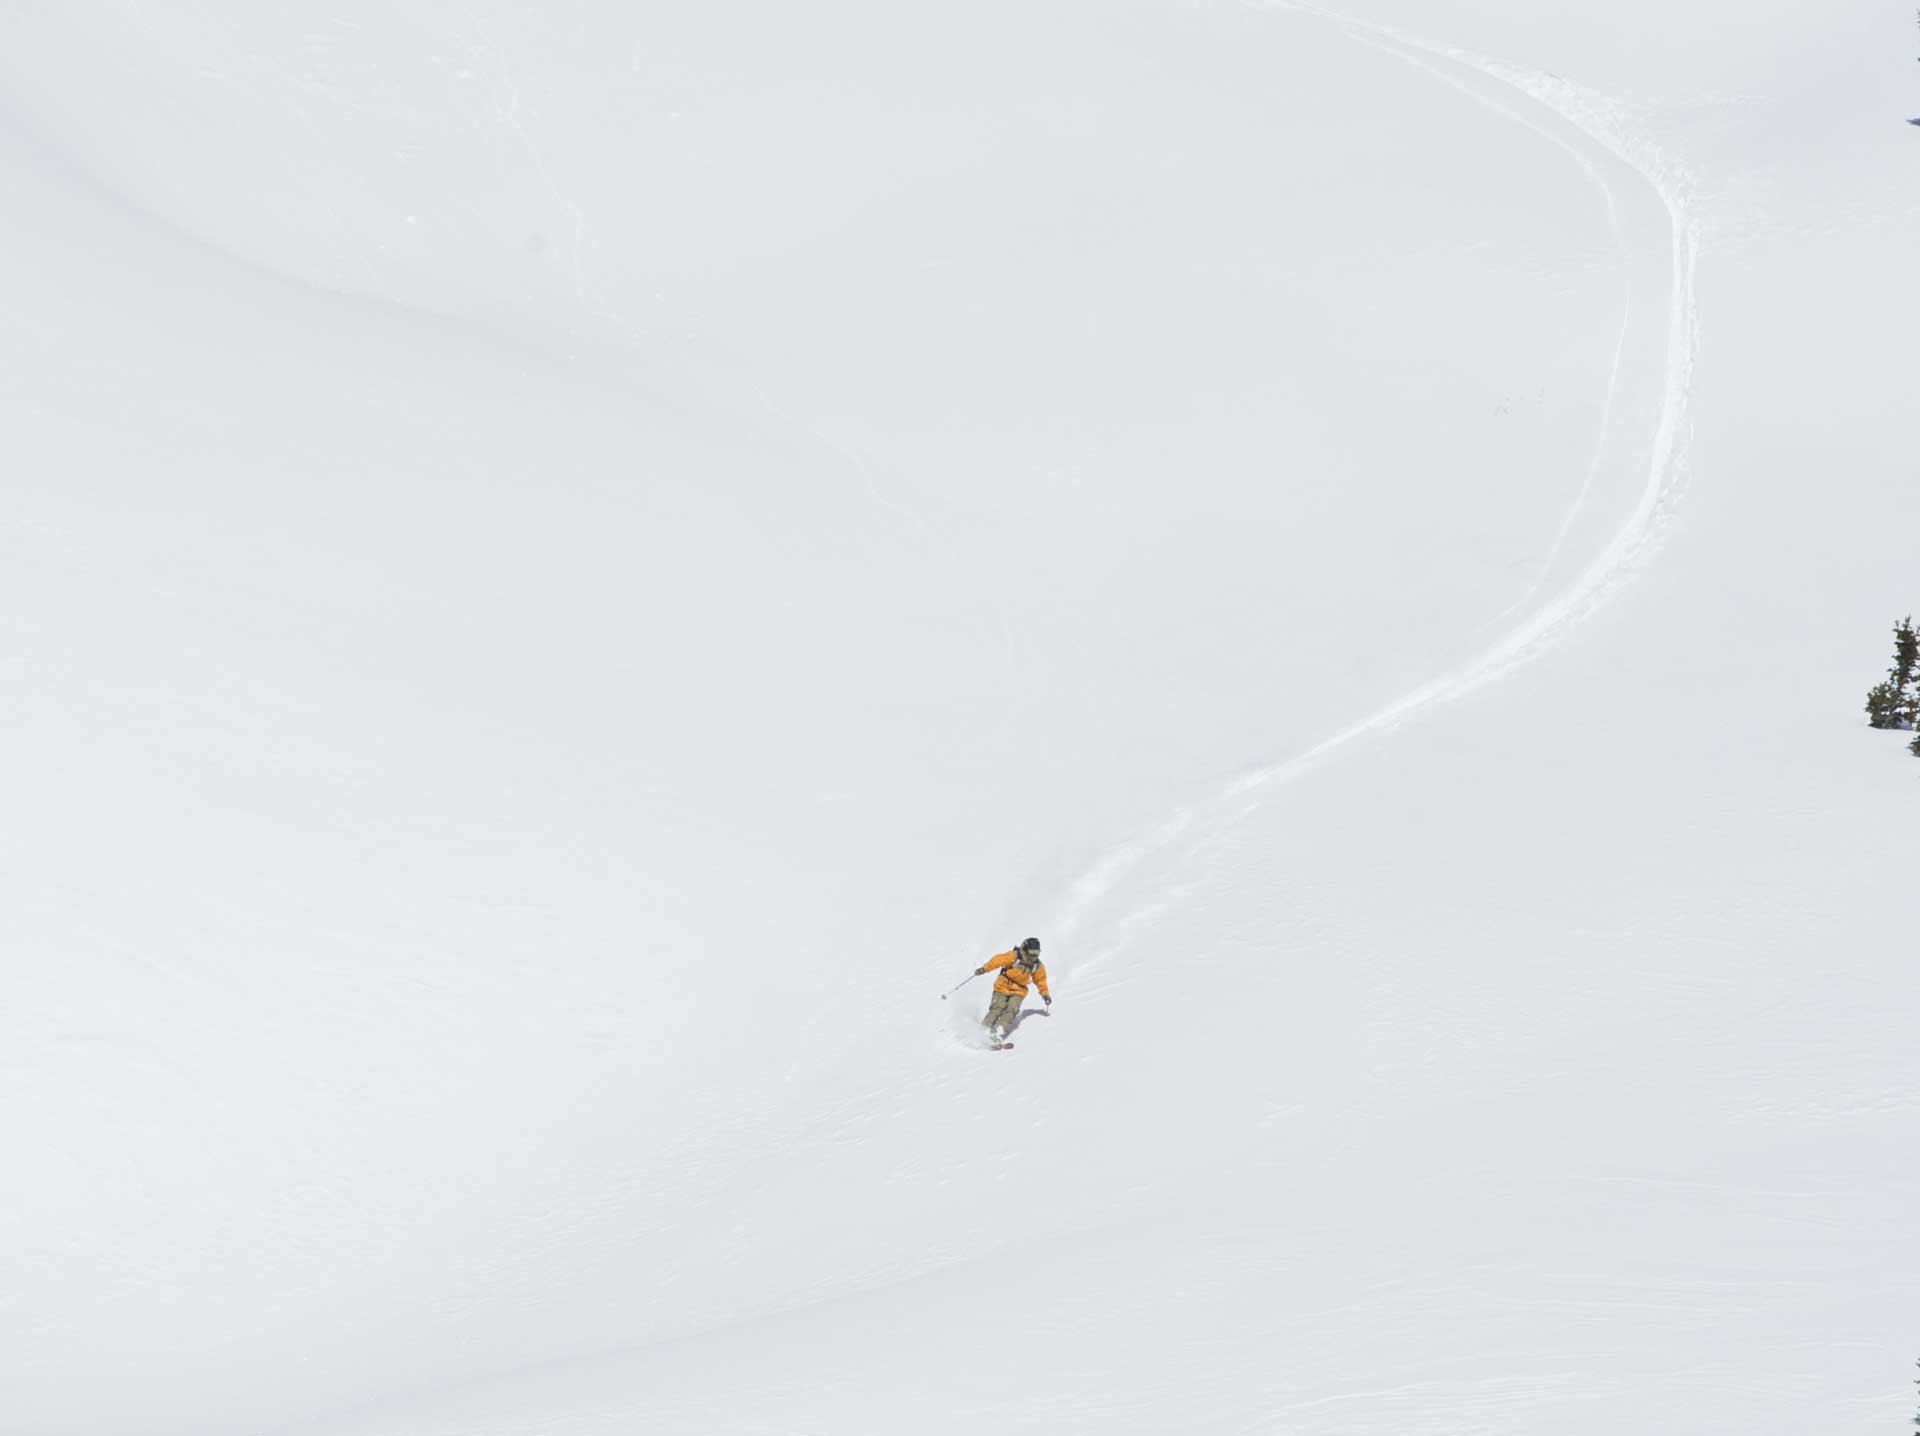 Spring backcountry skiing in Park City, UT. Photo by Ross Downard.